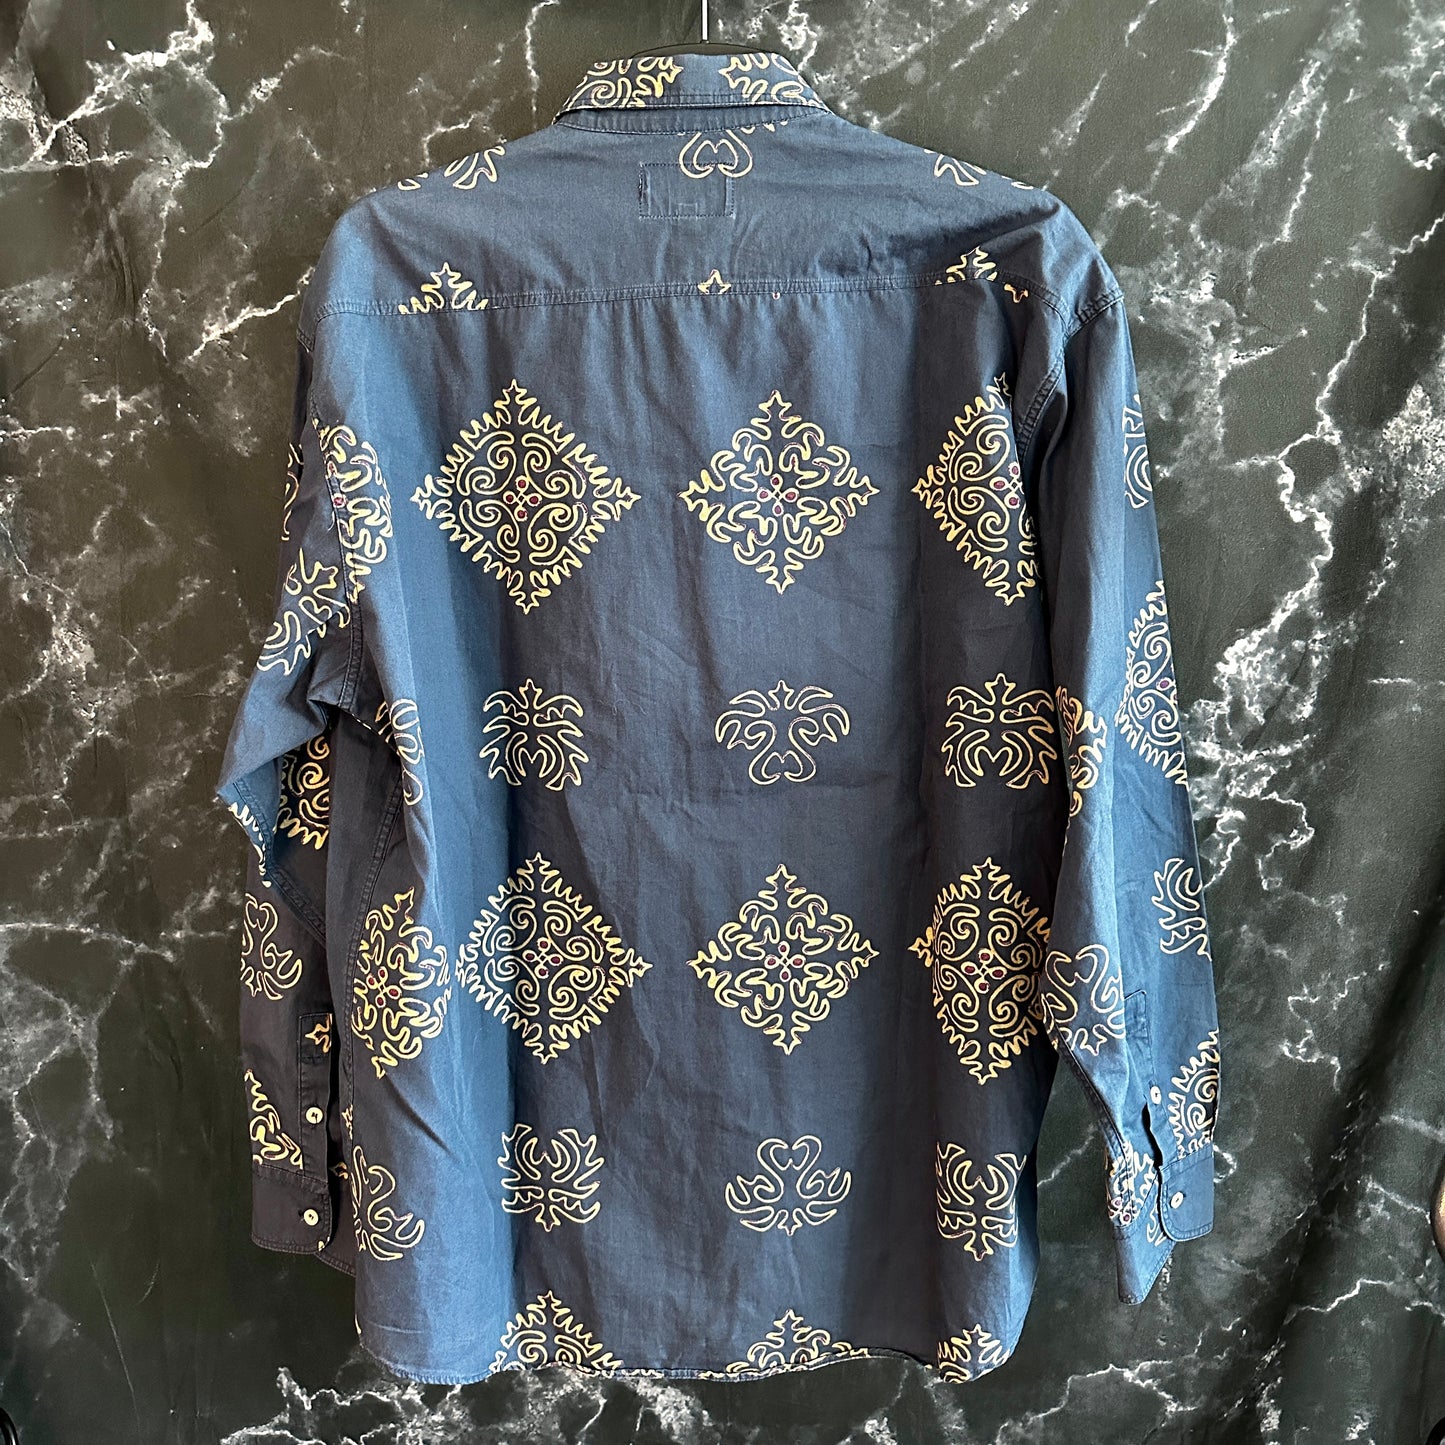 Armani Jeans Vintage 90s Shirt - XL - Made in Italy